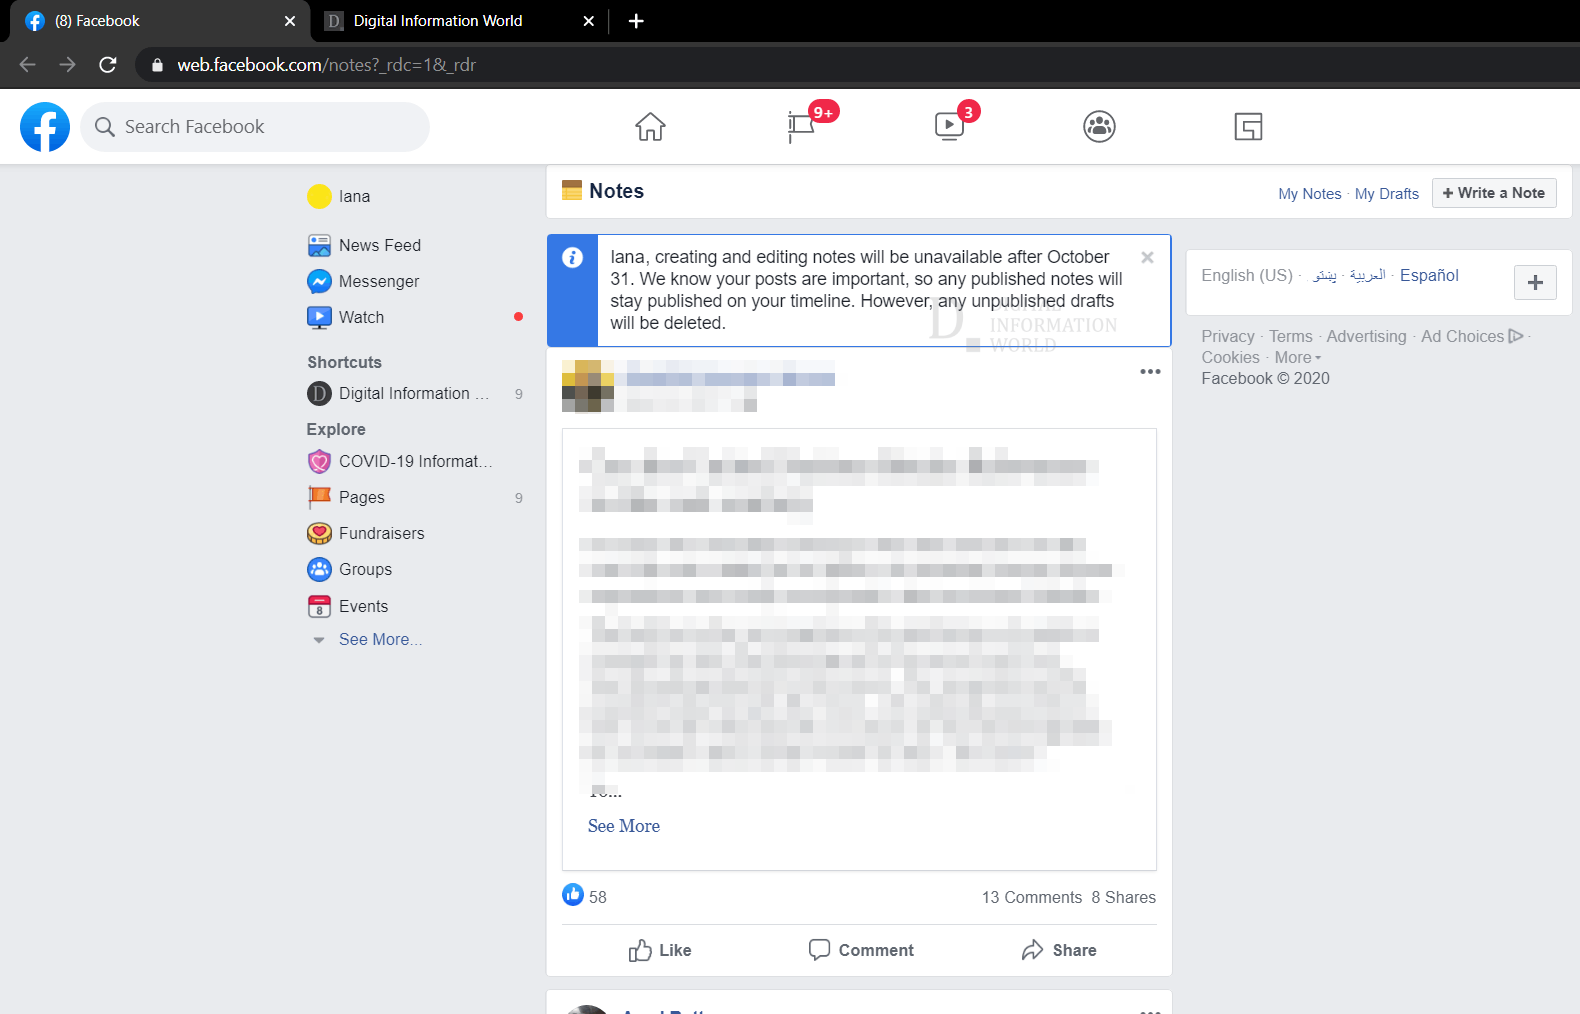 Facebook is sunsetting its Notes feature for all on Oct 31